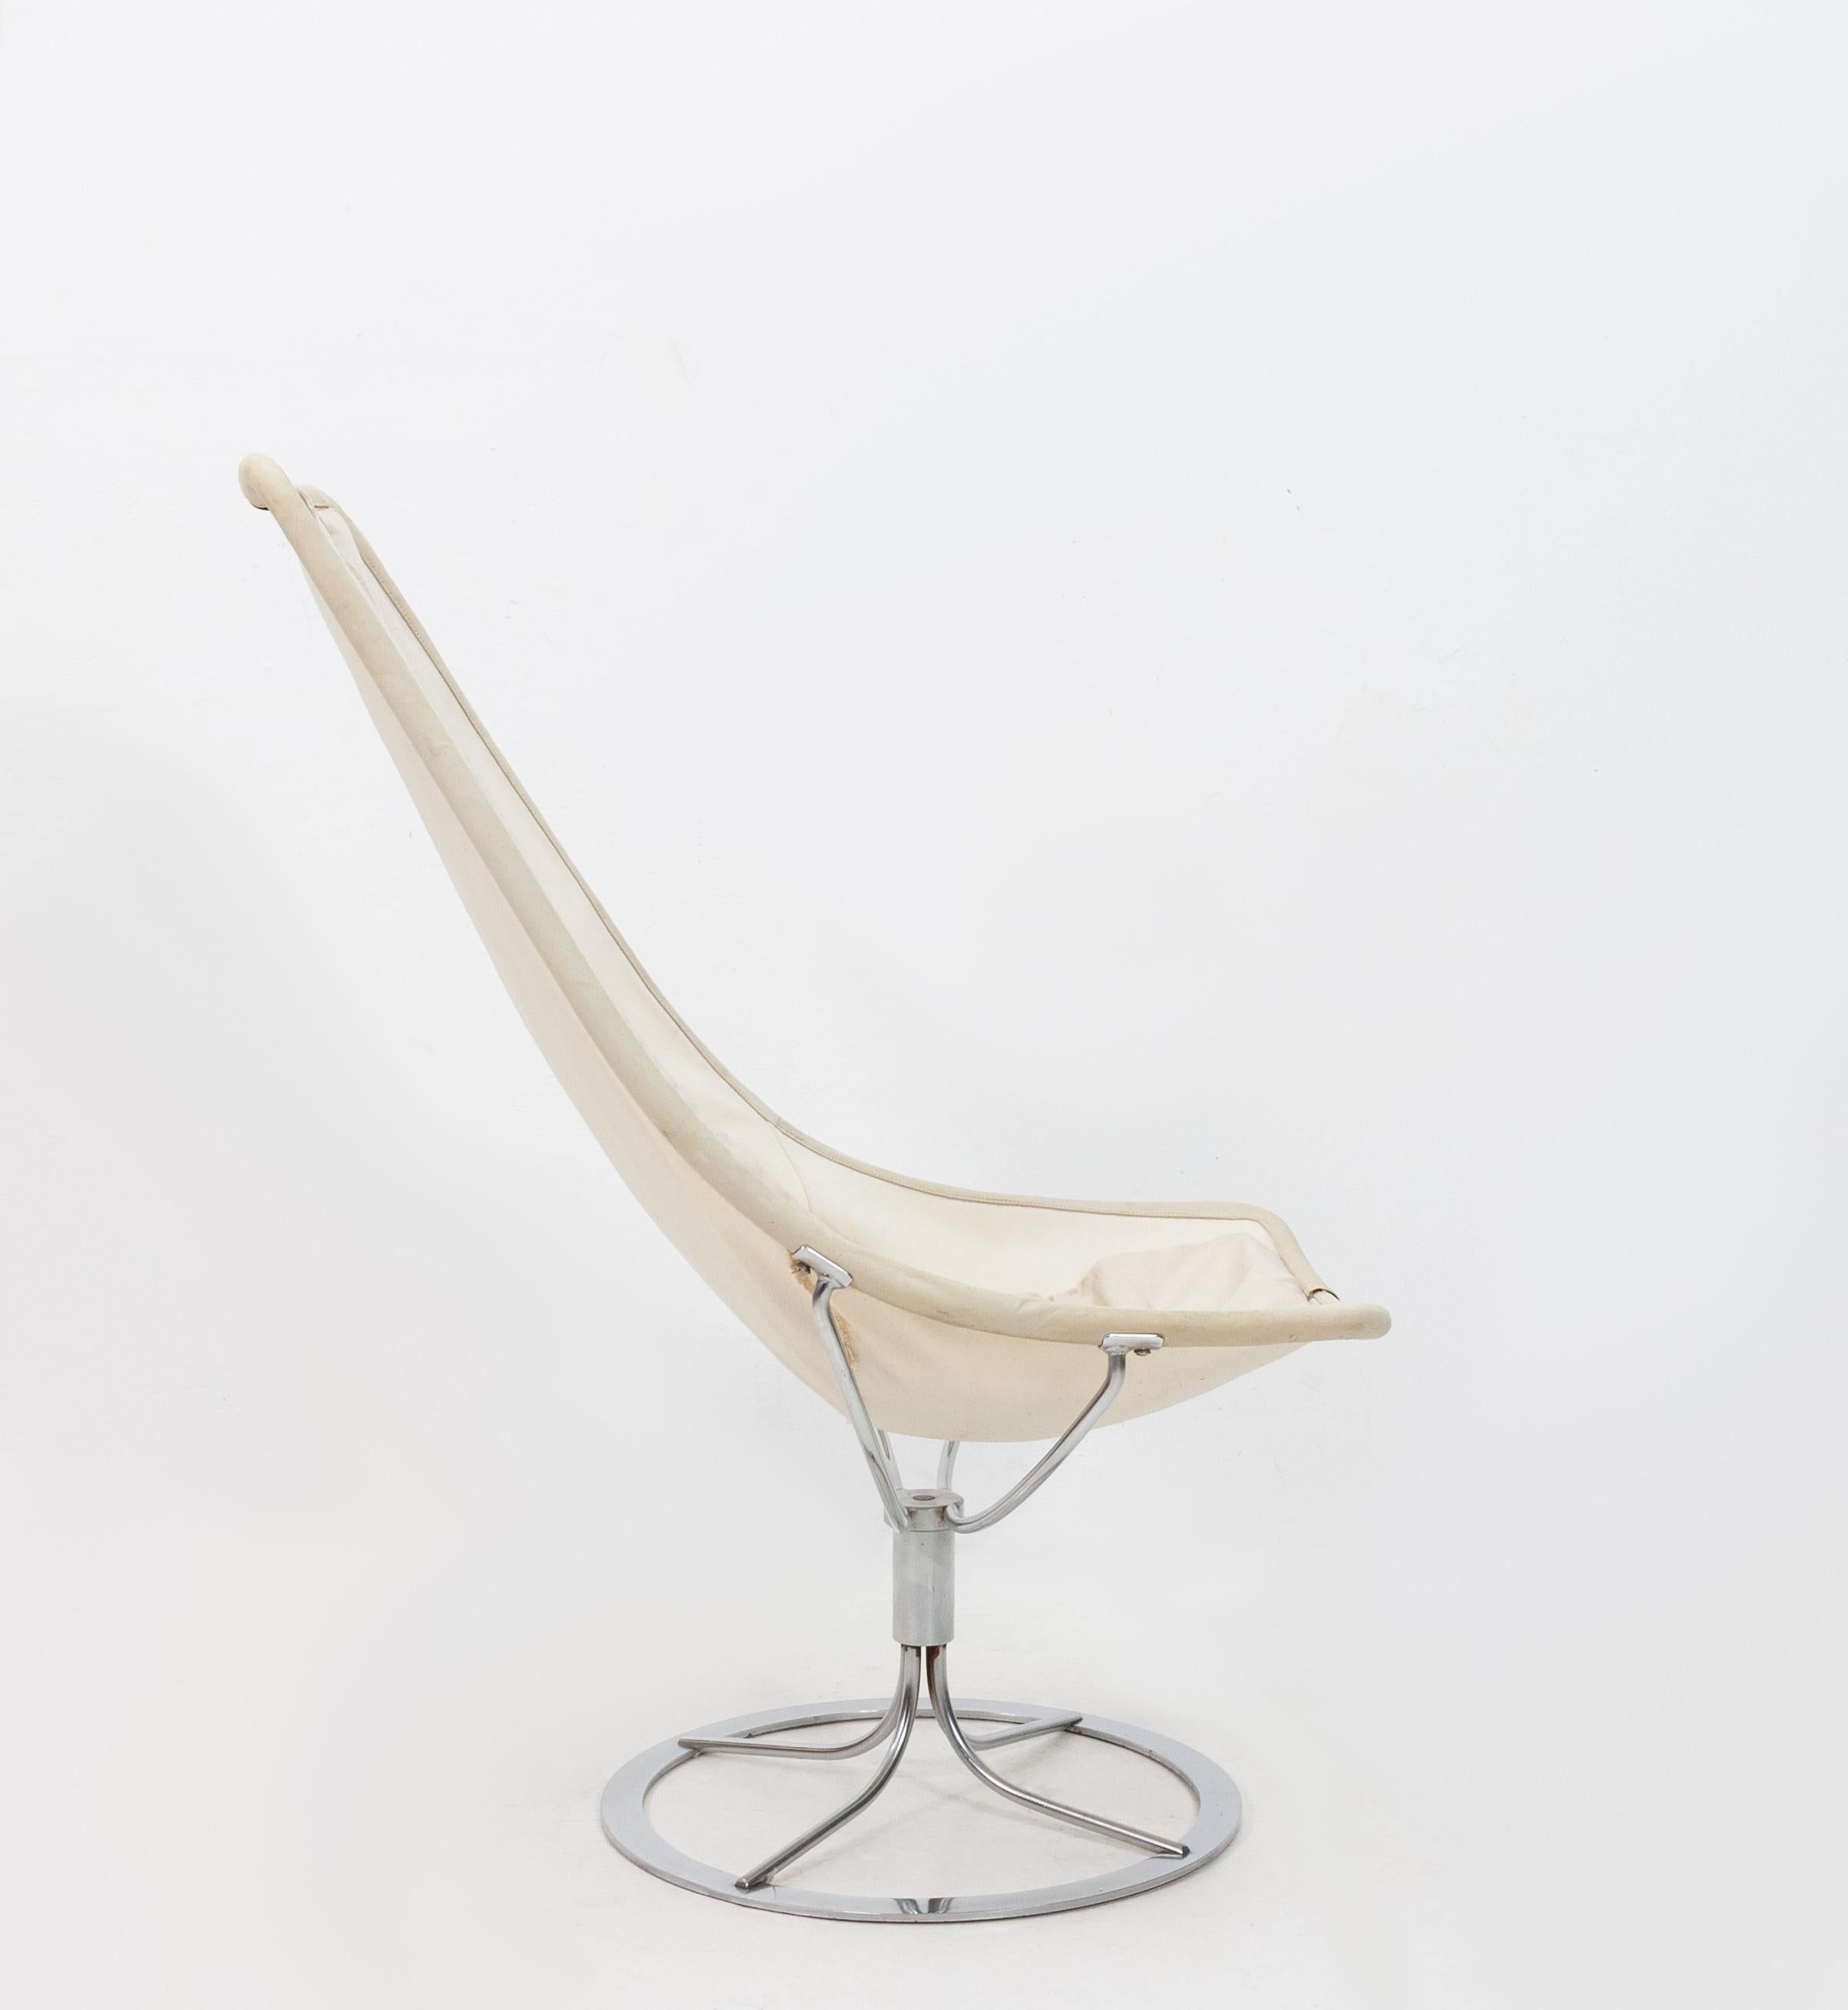 The “Jetson” lounge chair. Design Bruno Mathsson for Dux Zweden, 1960s . Canvas crème color

with a leather rim. Chrome rotatable base. Very nice elegant chair. Good condition.

 